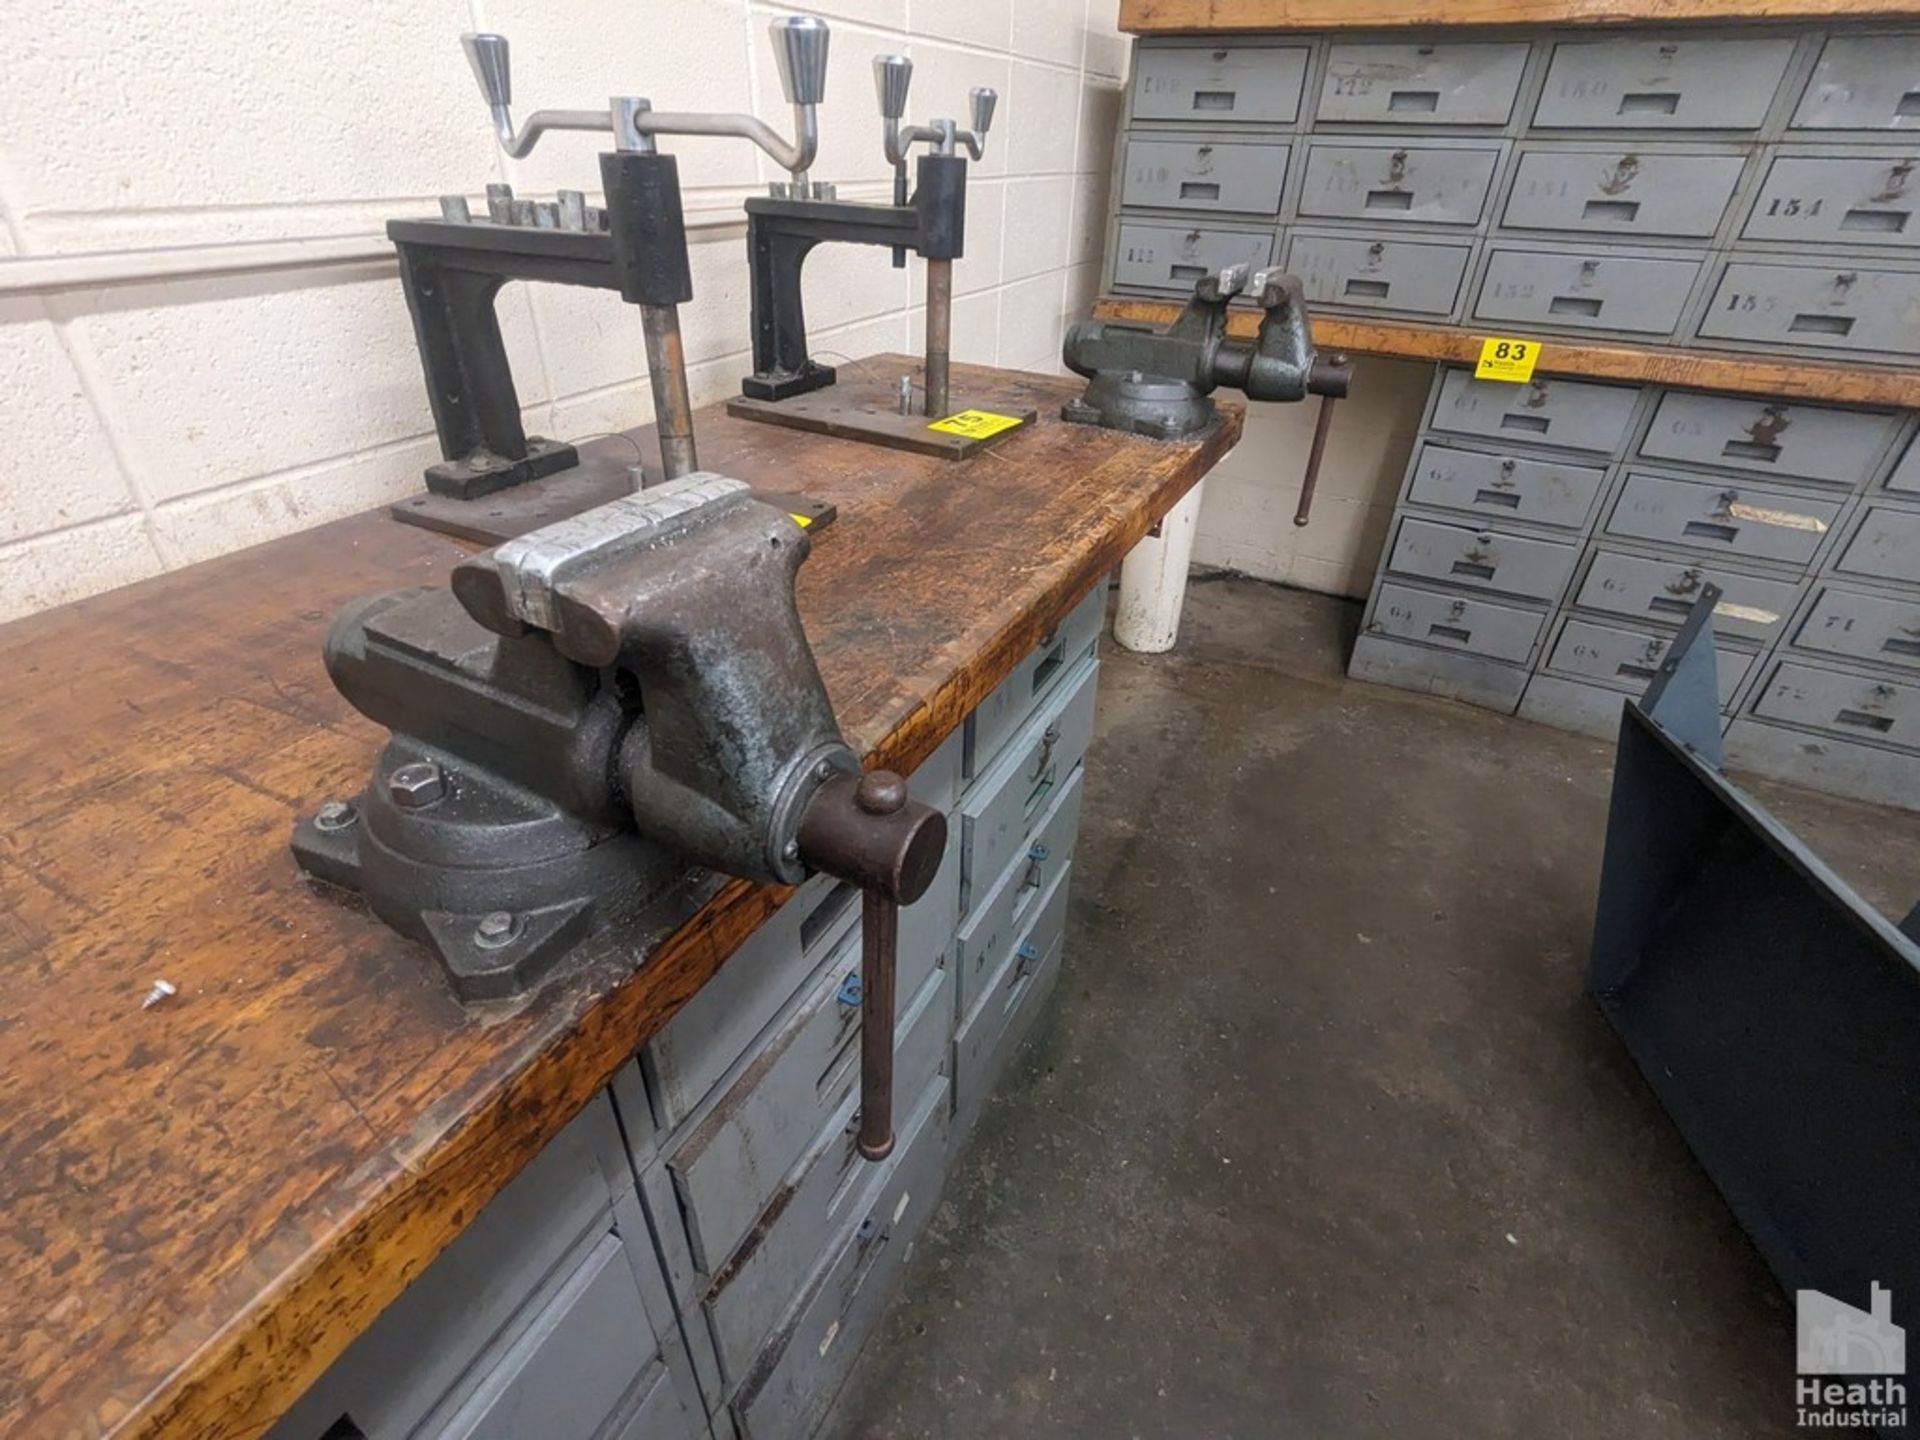 CABINET BASED WORKBENCH WITH DRAWERS AND TWO 4" BULLET STYLE VISES 8' X 2' Loading Fee :$75 - Image 2 of 2